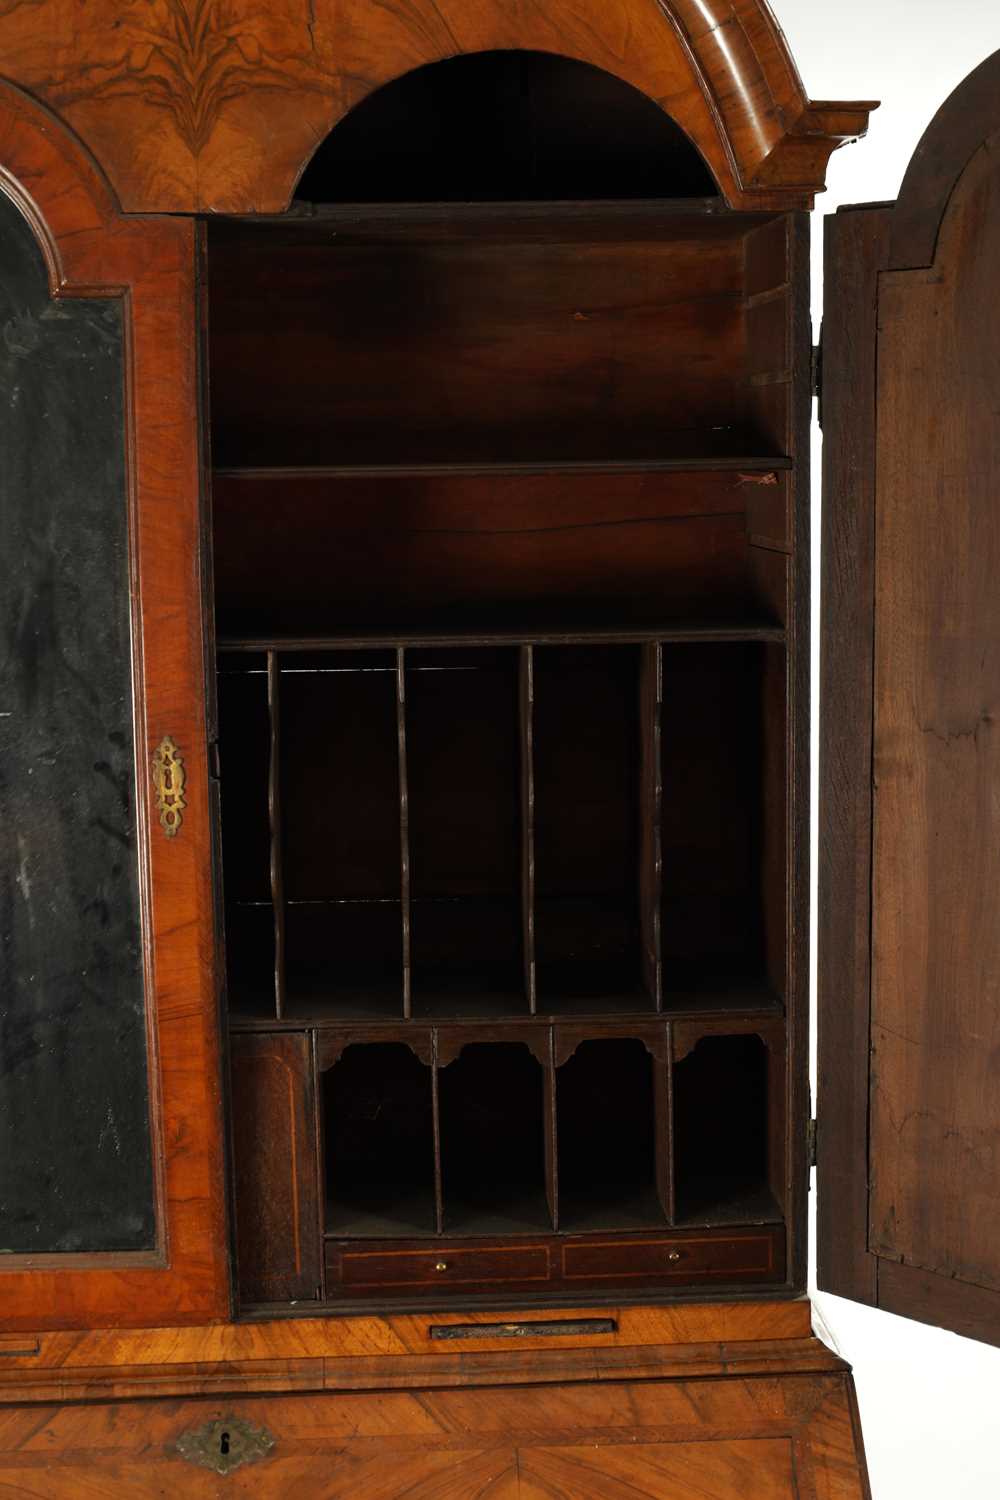 AN EARLY 18TH CENTURY FIGURED WALNUT AND OAK BREAK ARCHED TOP BUREAU BOOKCASE - Image 7 of 10